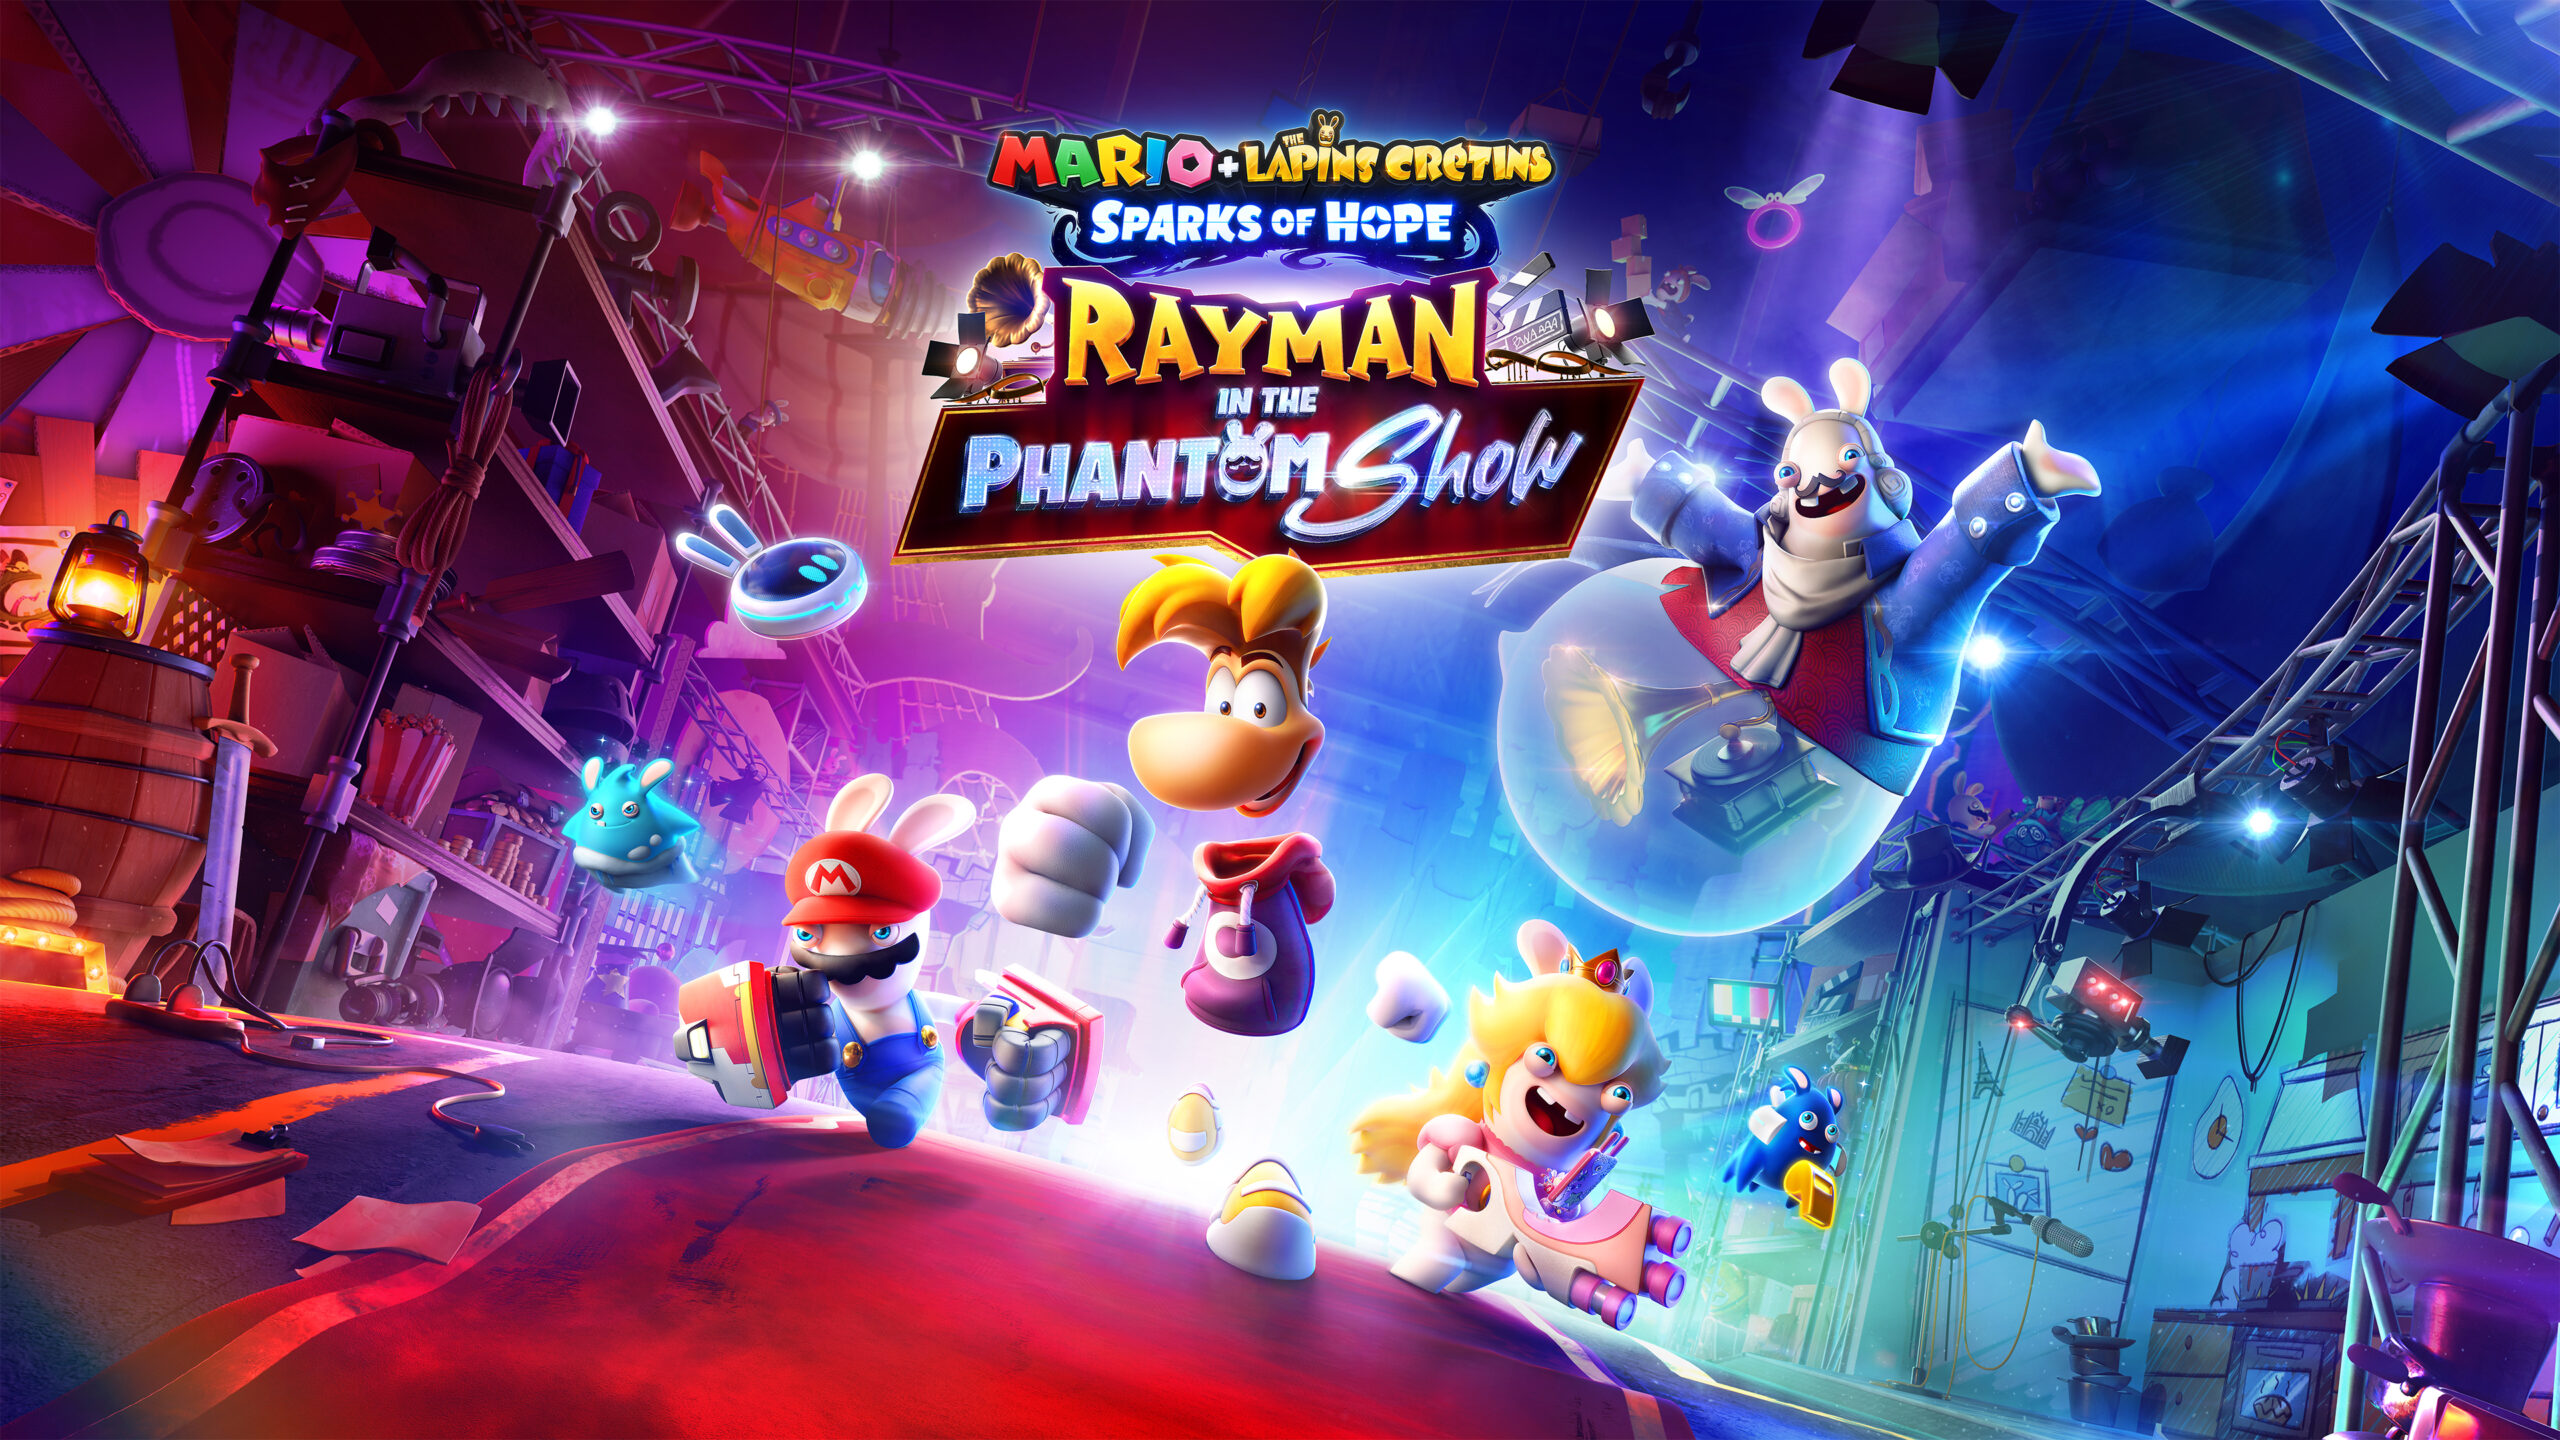 Rayman returns in final Mario + Rabbids Sparks of Hope DLC